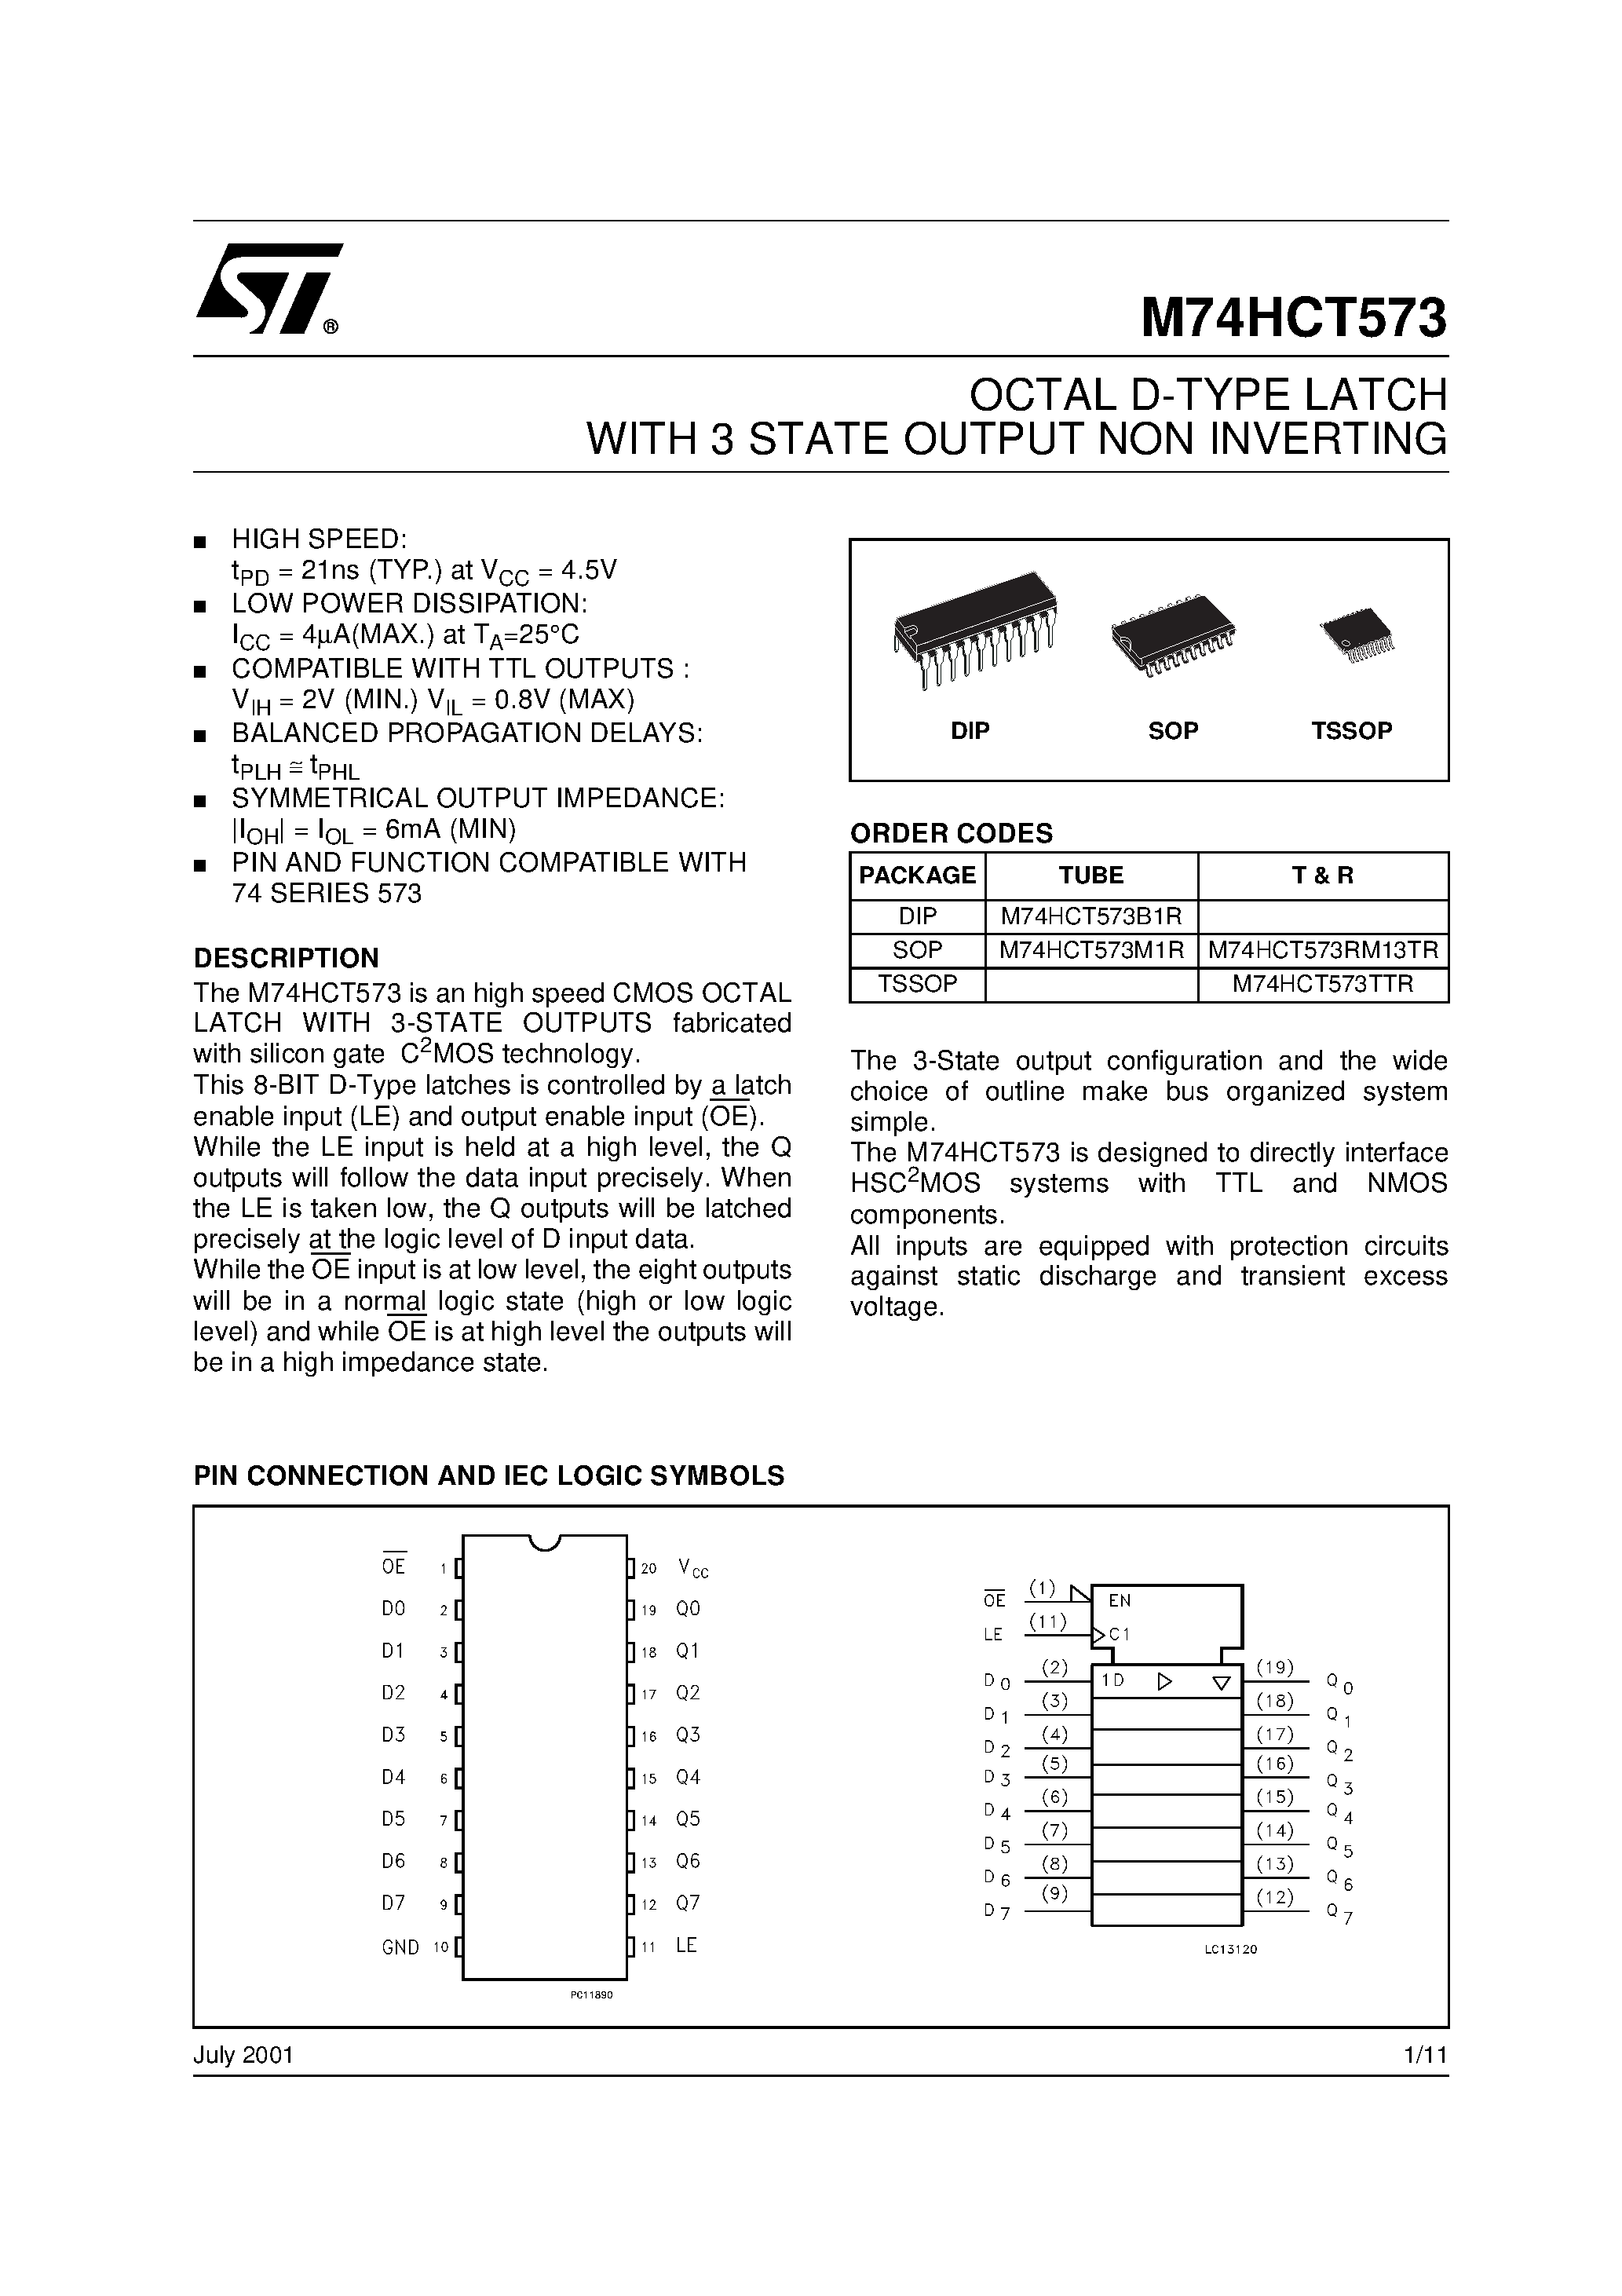 Datasheet M74HCT573 - OCTAL D-TYPE LATCH WITH 3 STATE OUTPUT NON INVERTING page 1